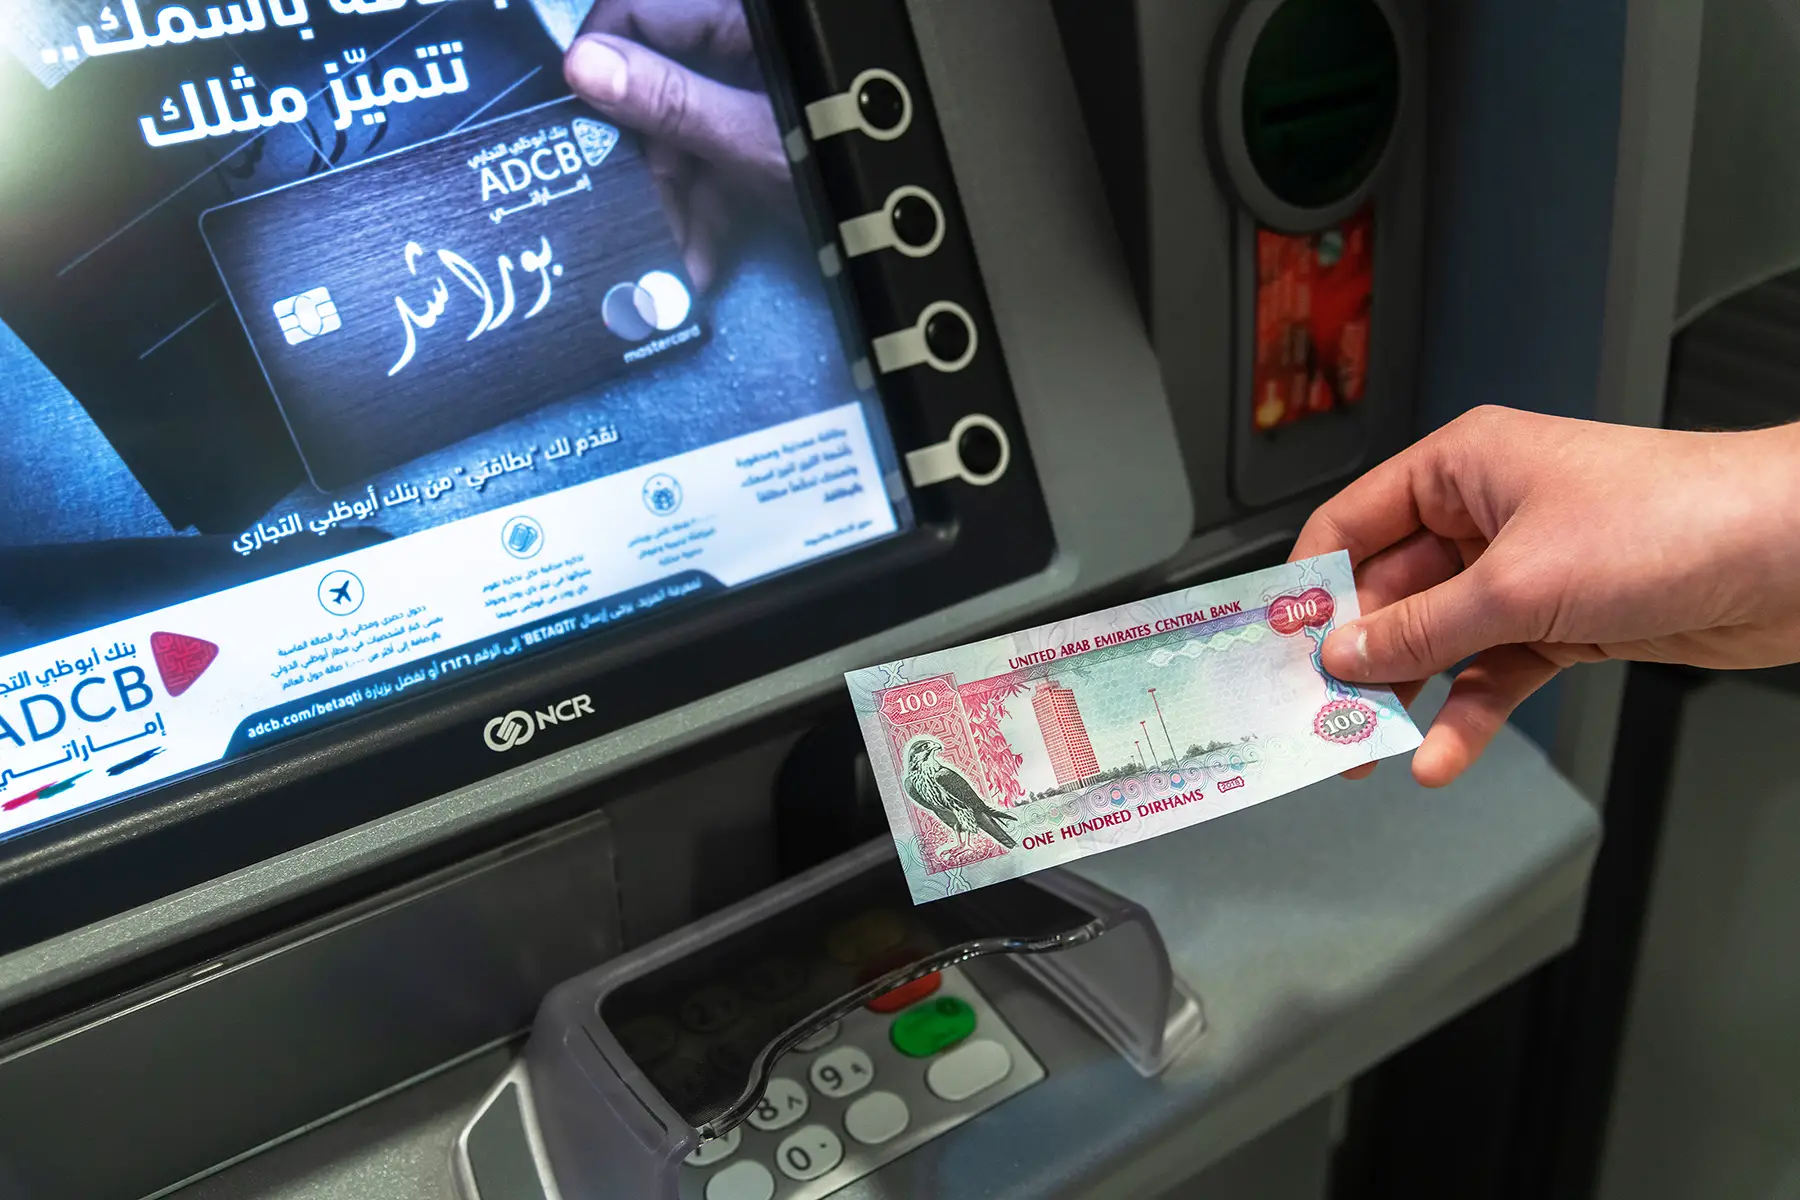 Withdrawing a UAE dirham note from an ATM